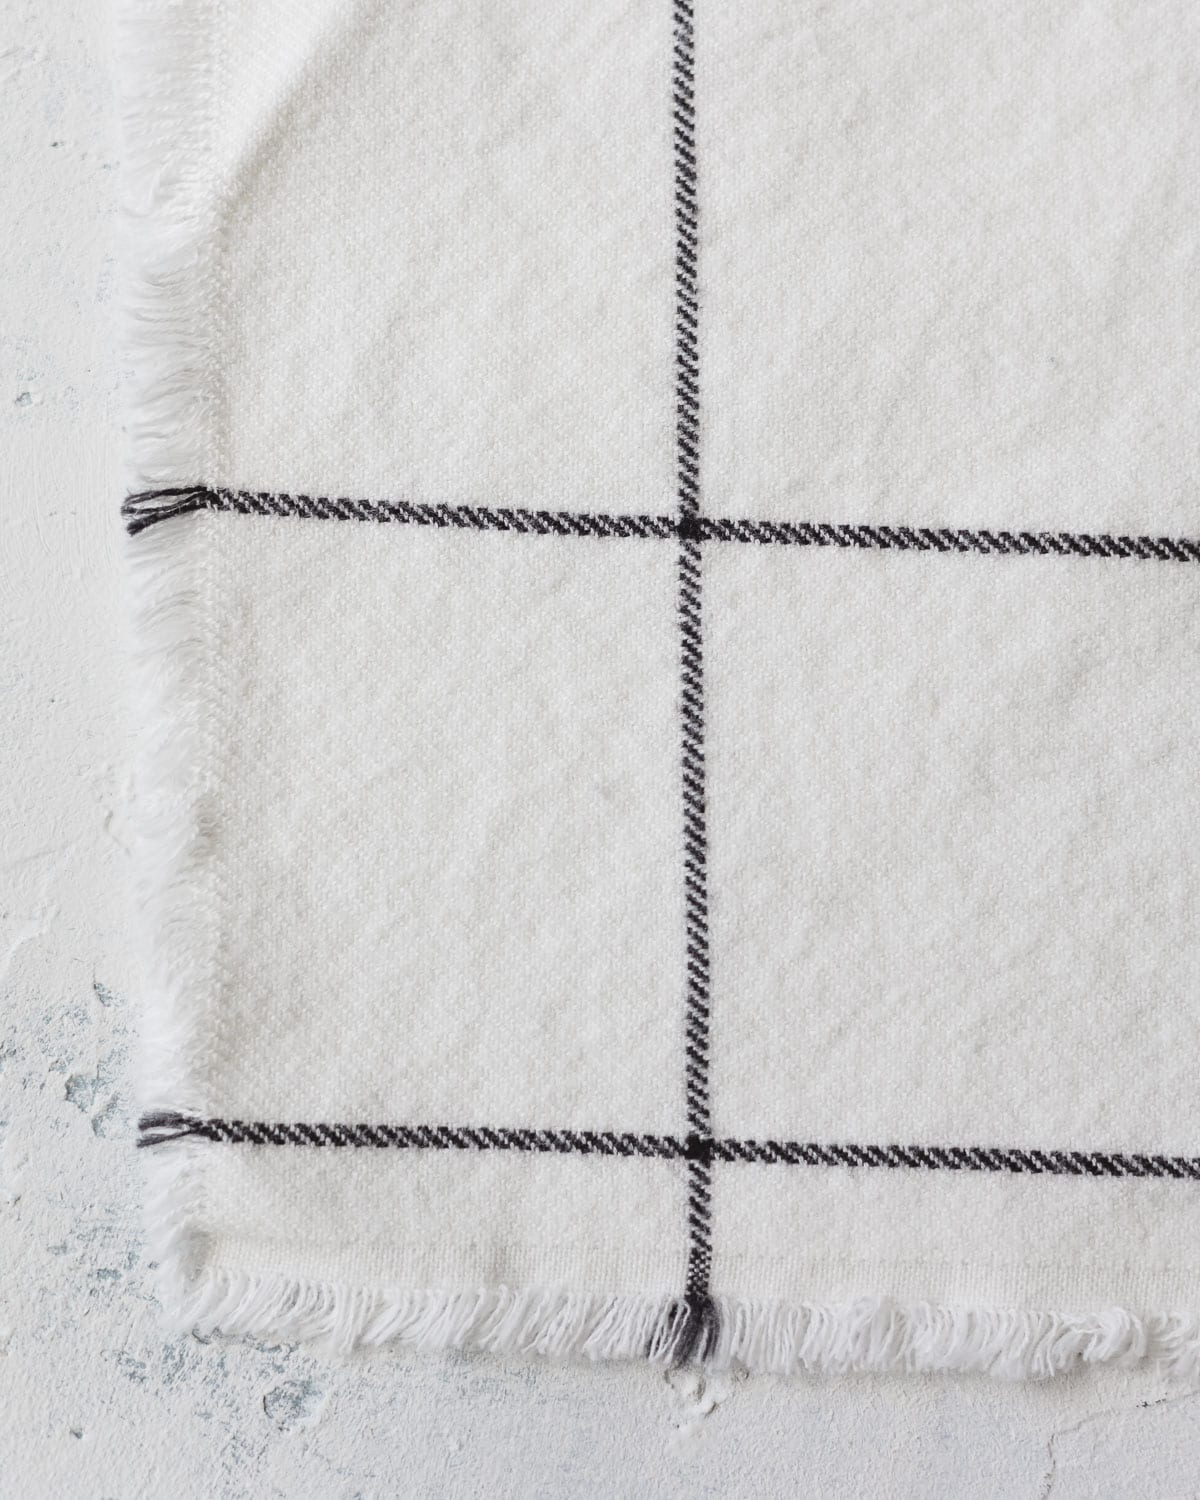 Selvage edge on a piece of white fabric with black grid.